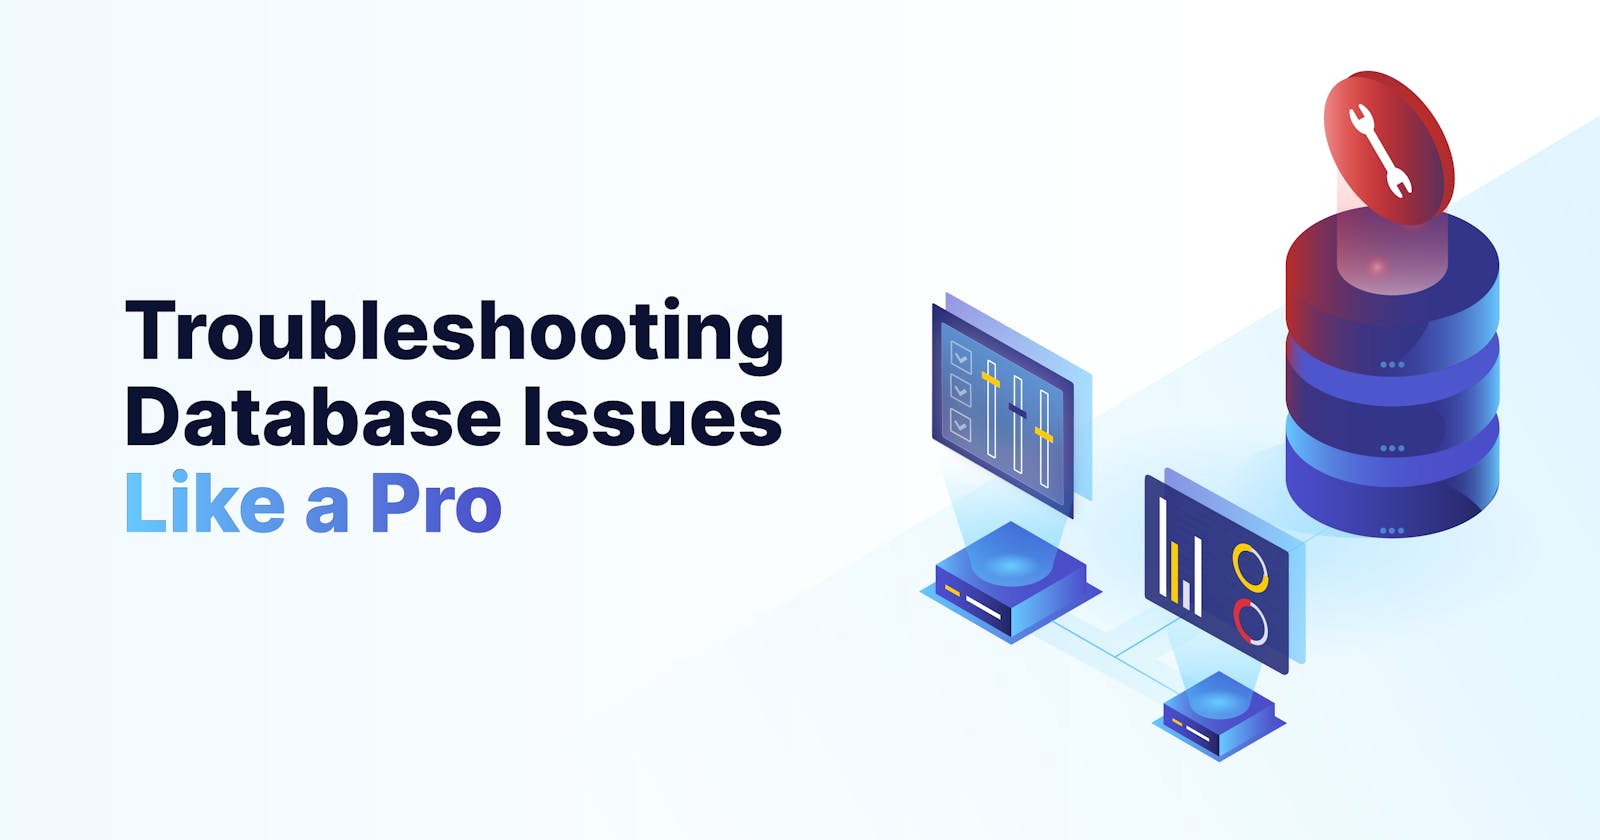 Troubleshooting Database Issues Like a Pro